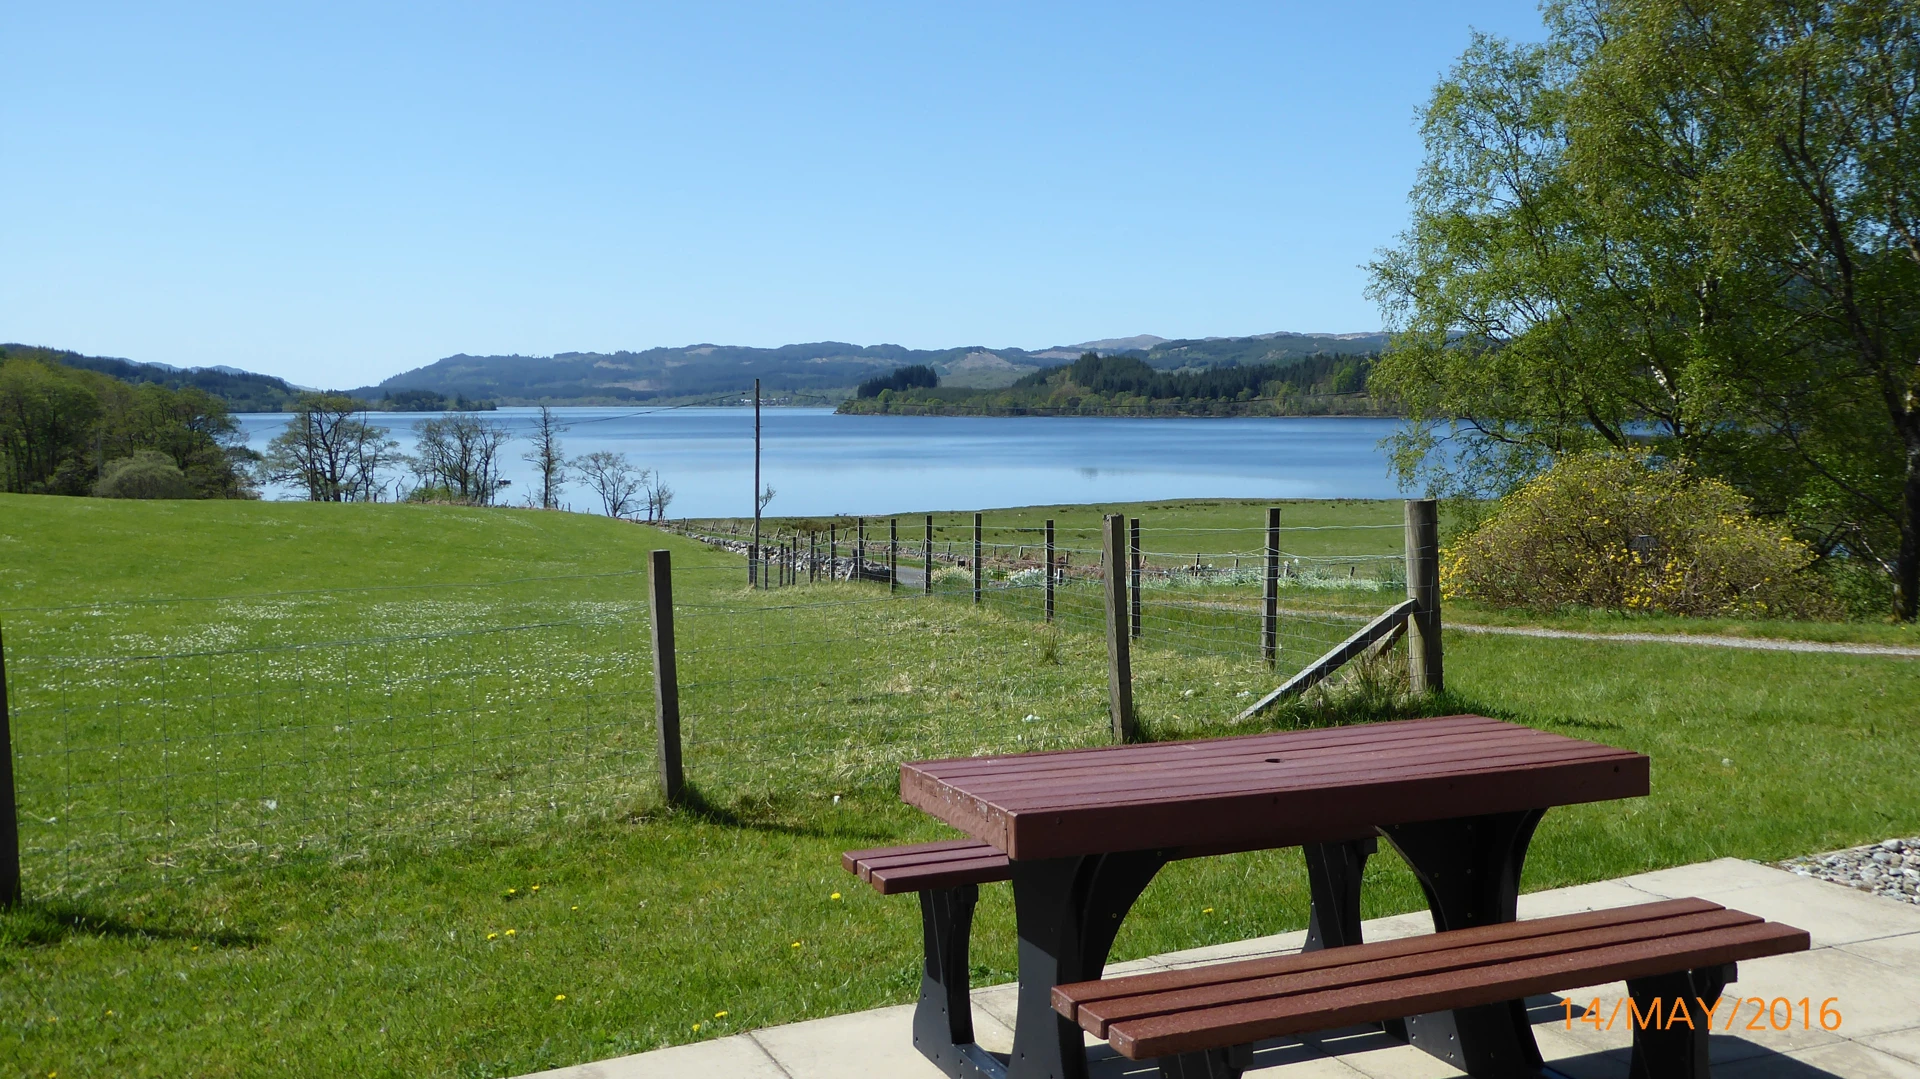 barr-beithe-lower-picnic-table-and-loch-awe.jpg (1)